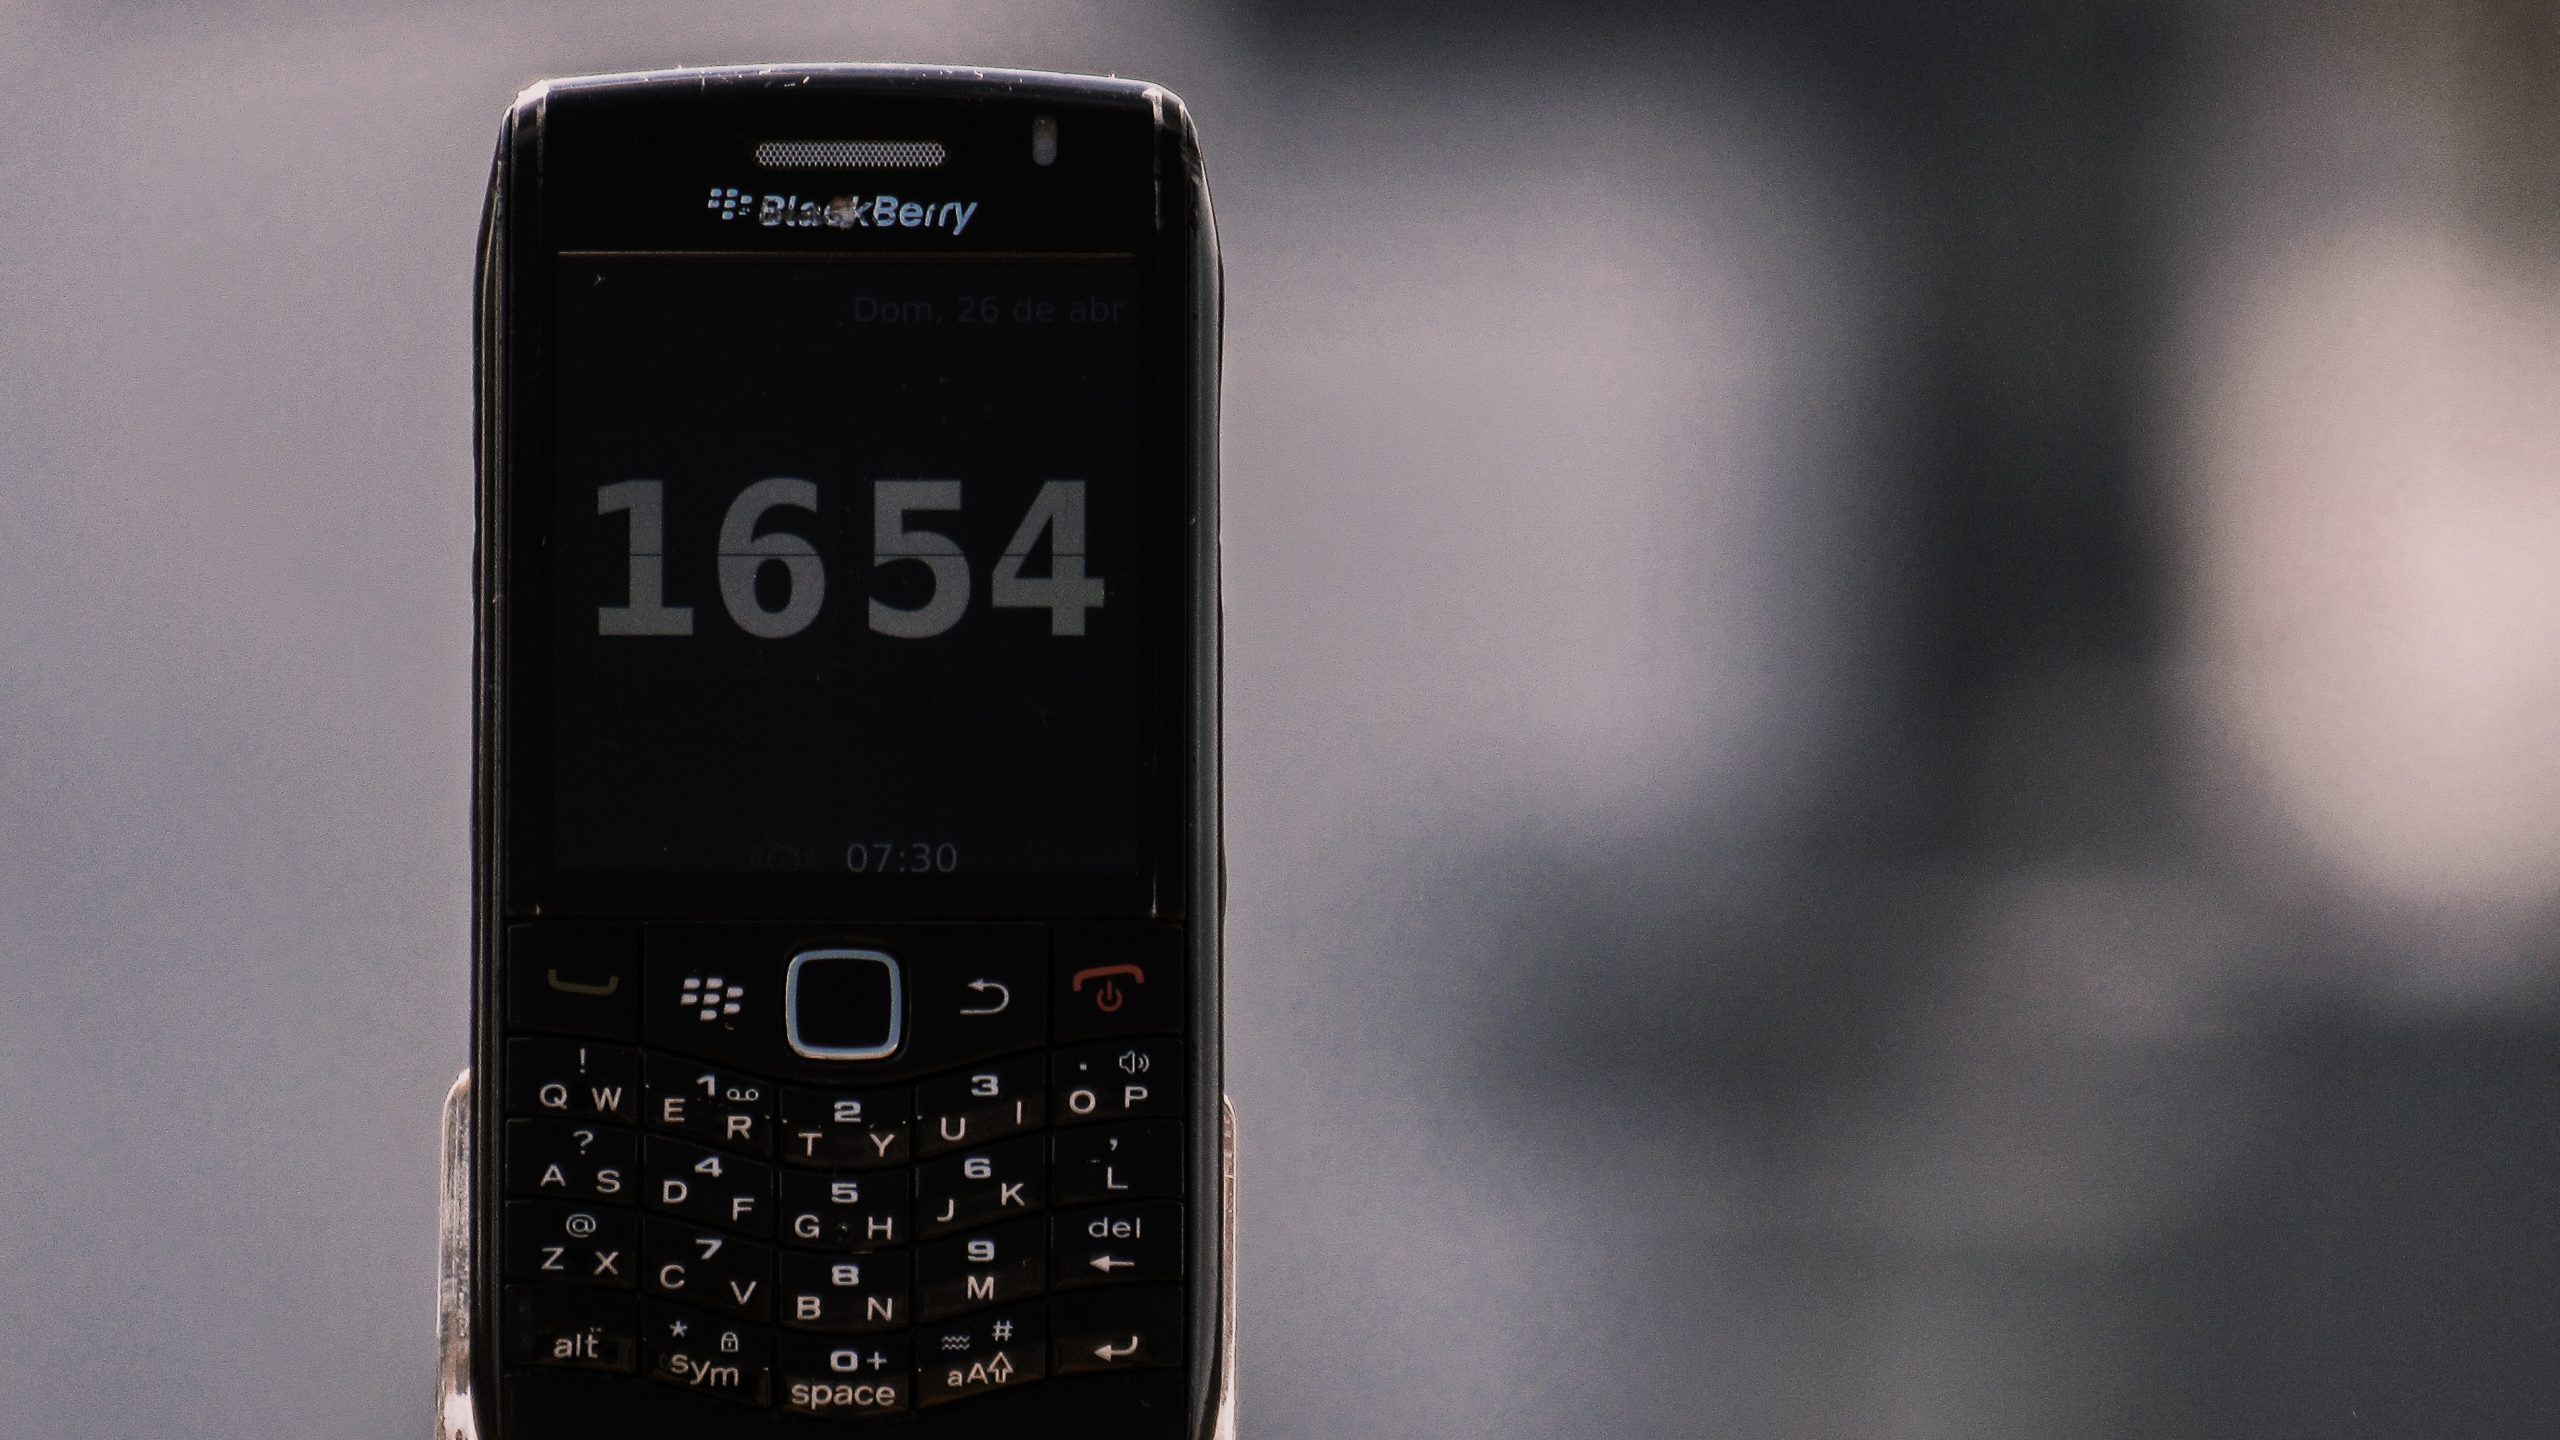 Close up of a BlackBerry device.